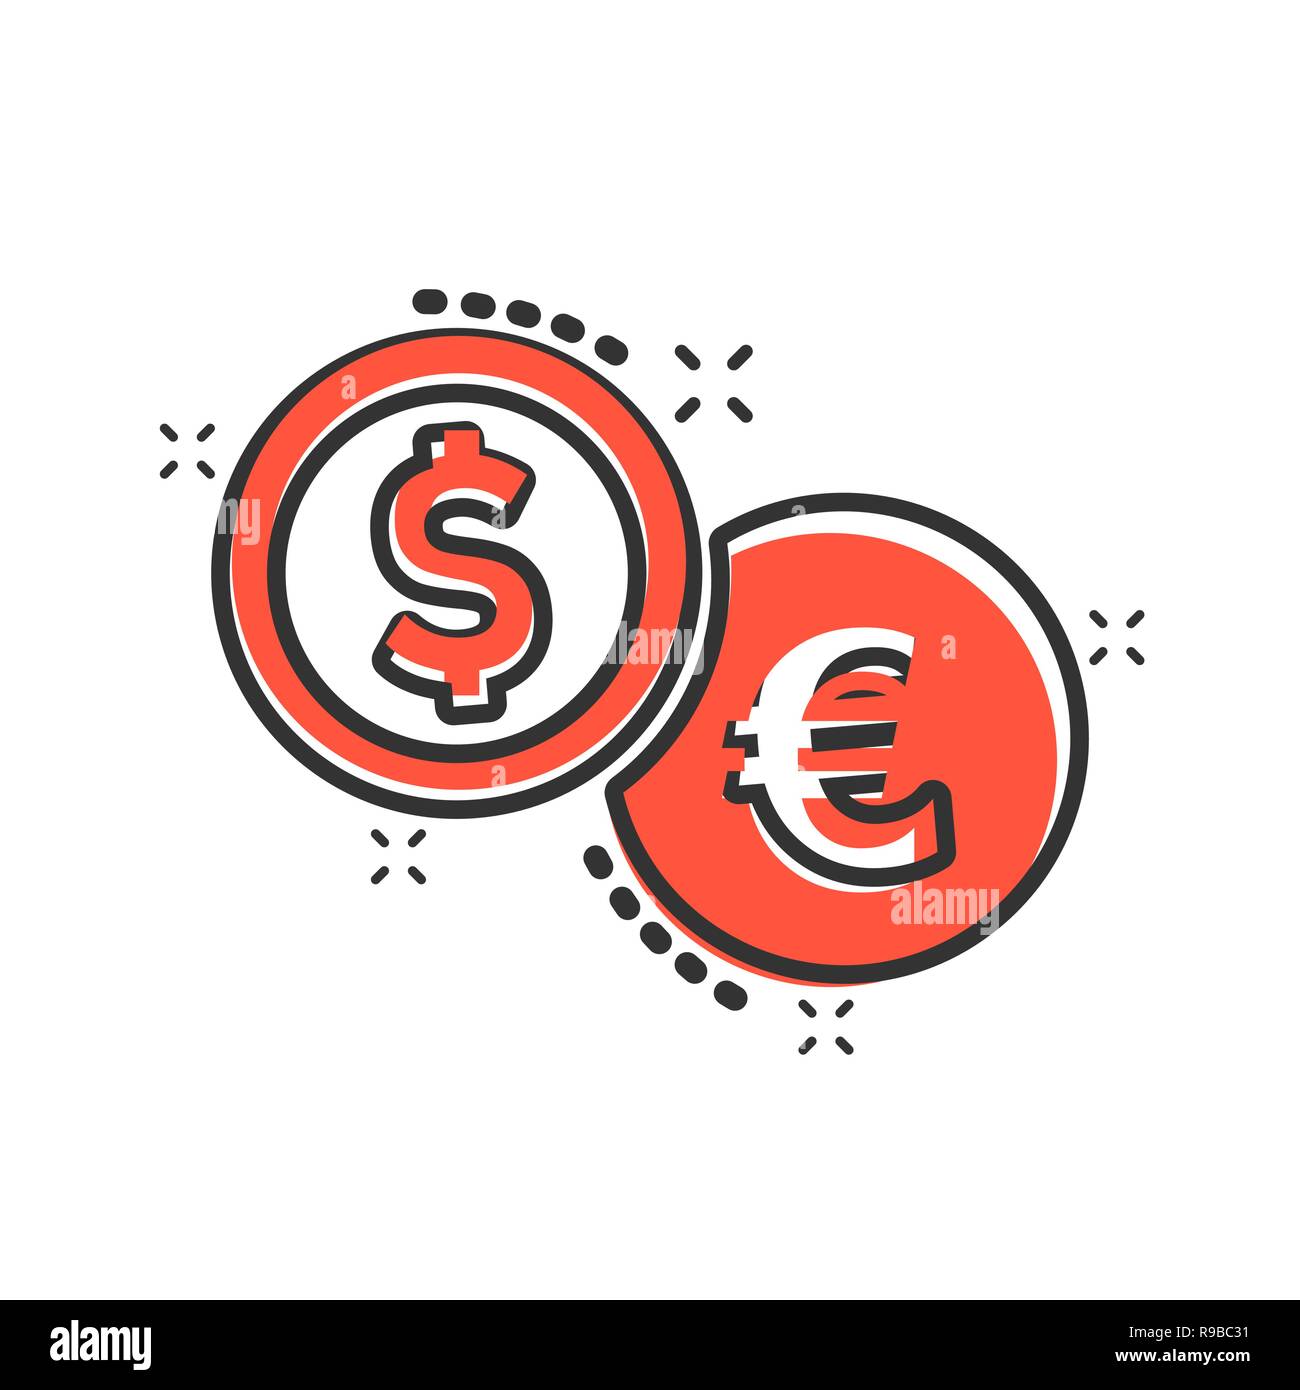 Coins stack icon in comic style. Dollar, euro coin vector cartoon illustration pictogram. Money stacked business concept splash effect. Stock Vector